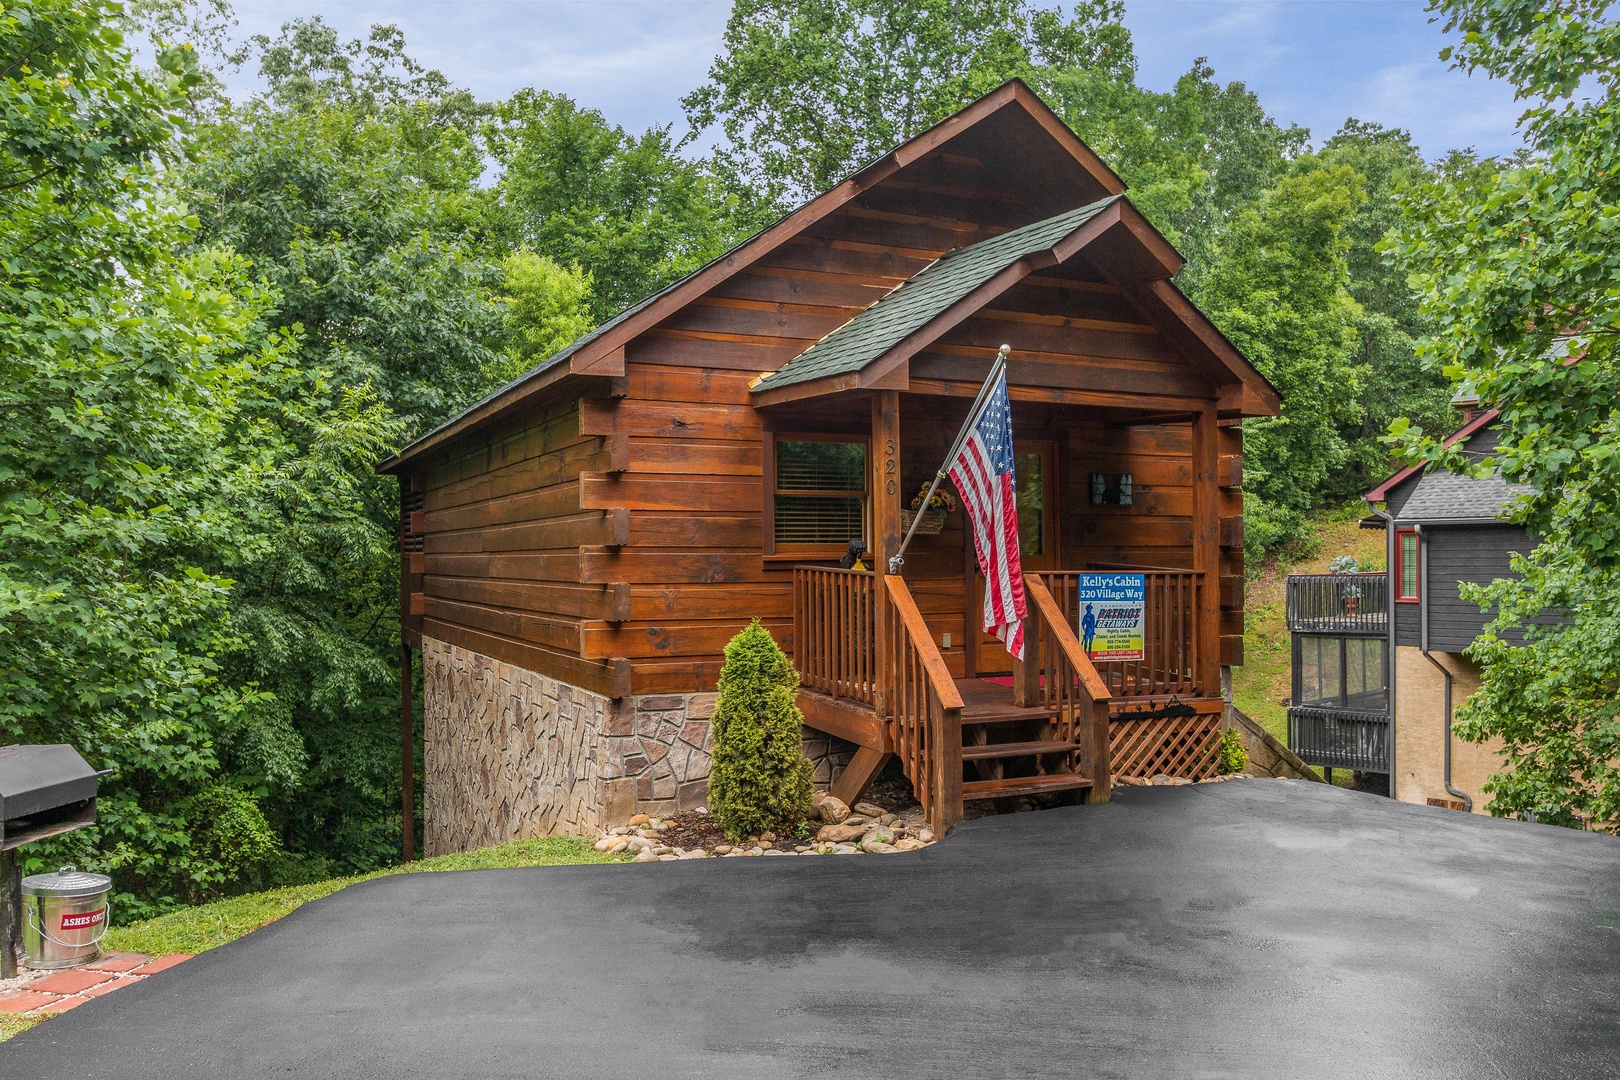 Kelly's Cabin, a 1 bedroom cabin rental located in Pigeon Forge